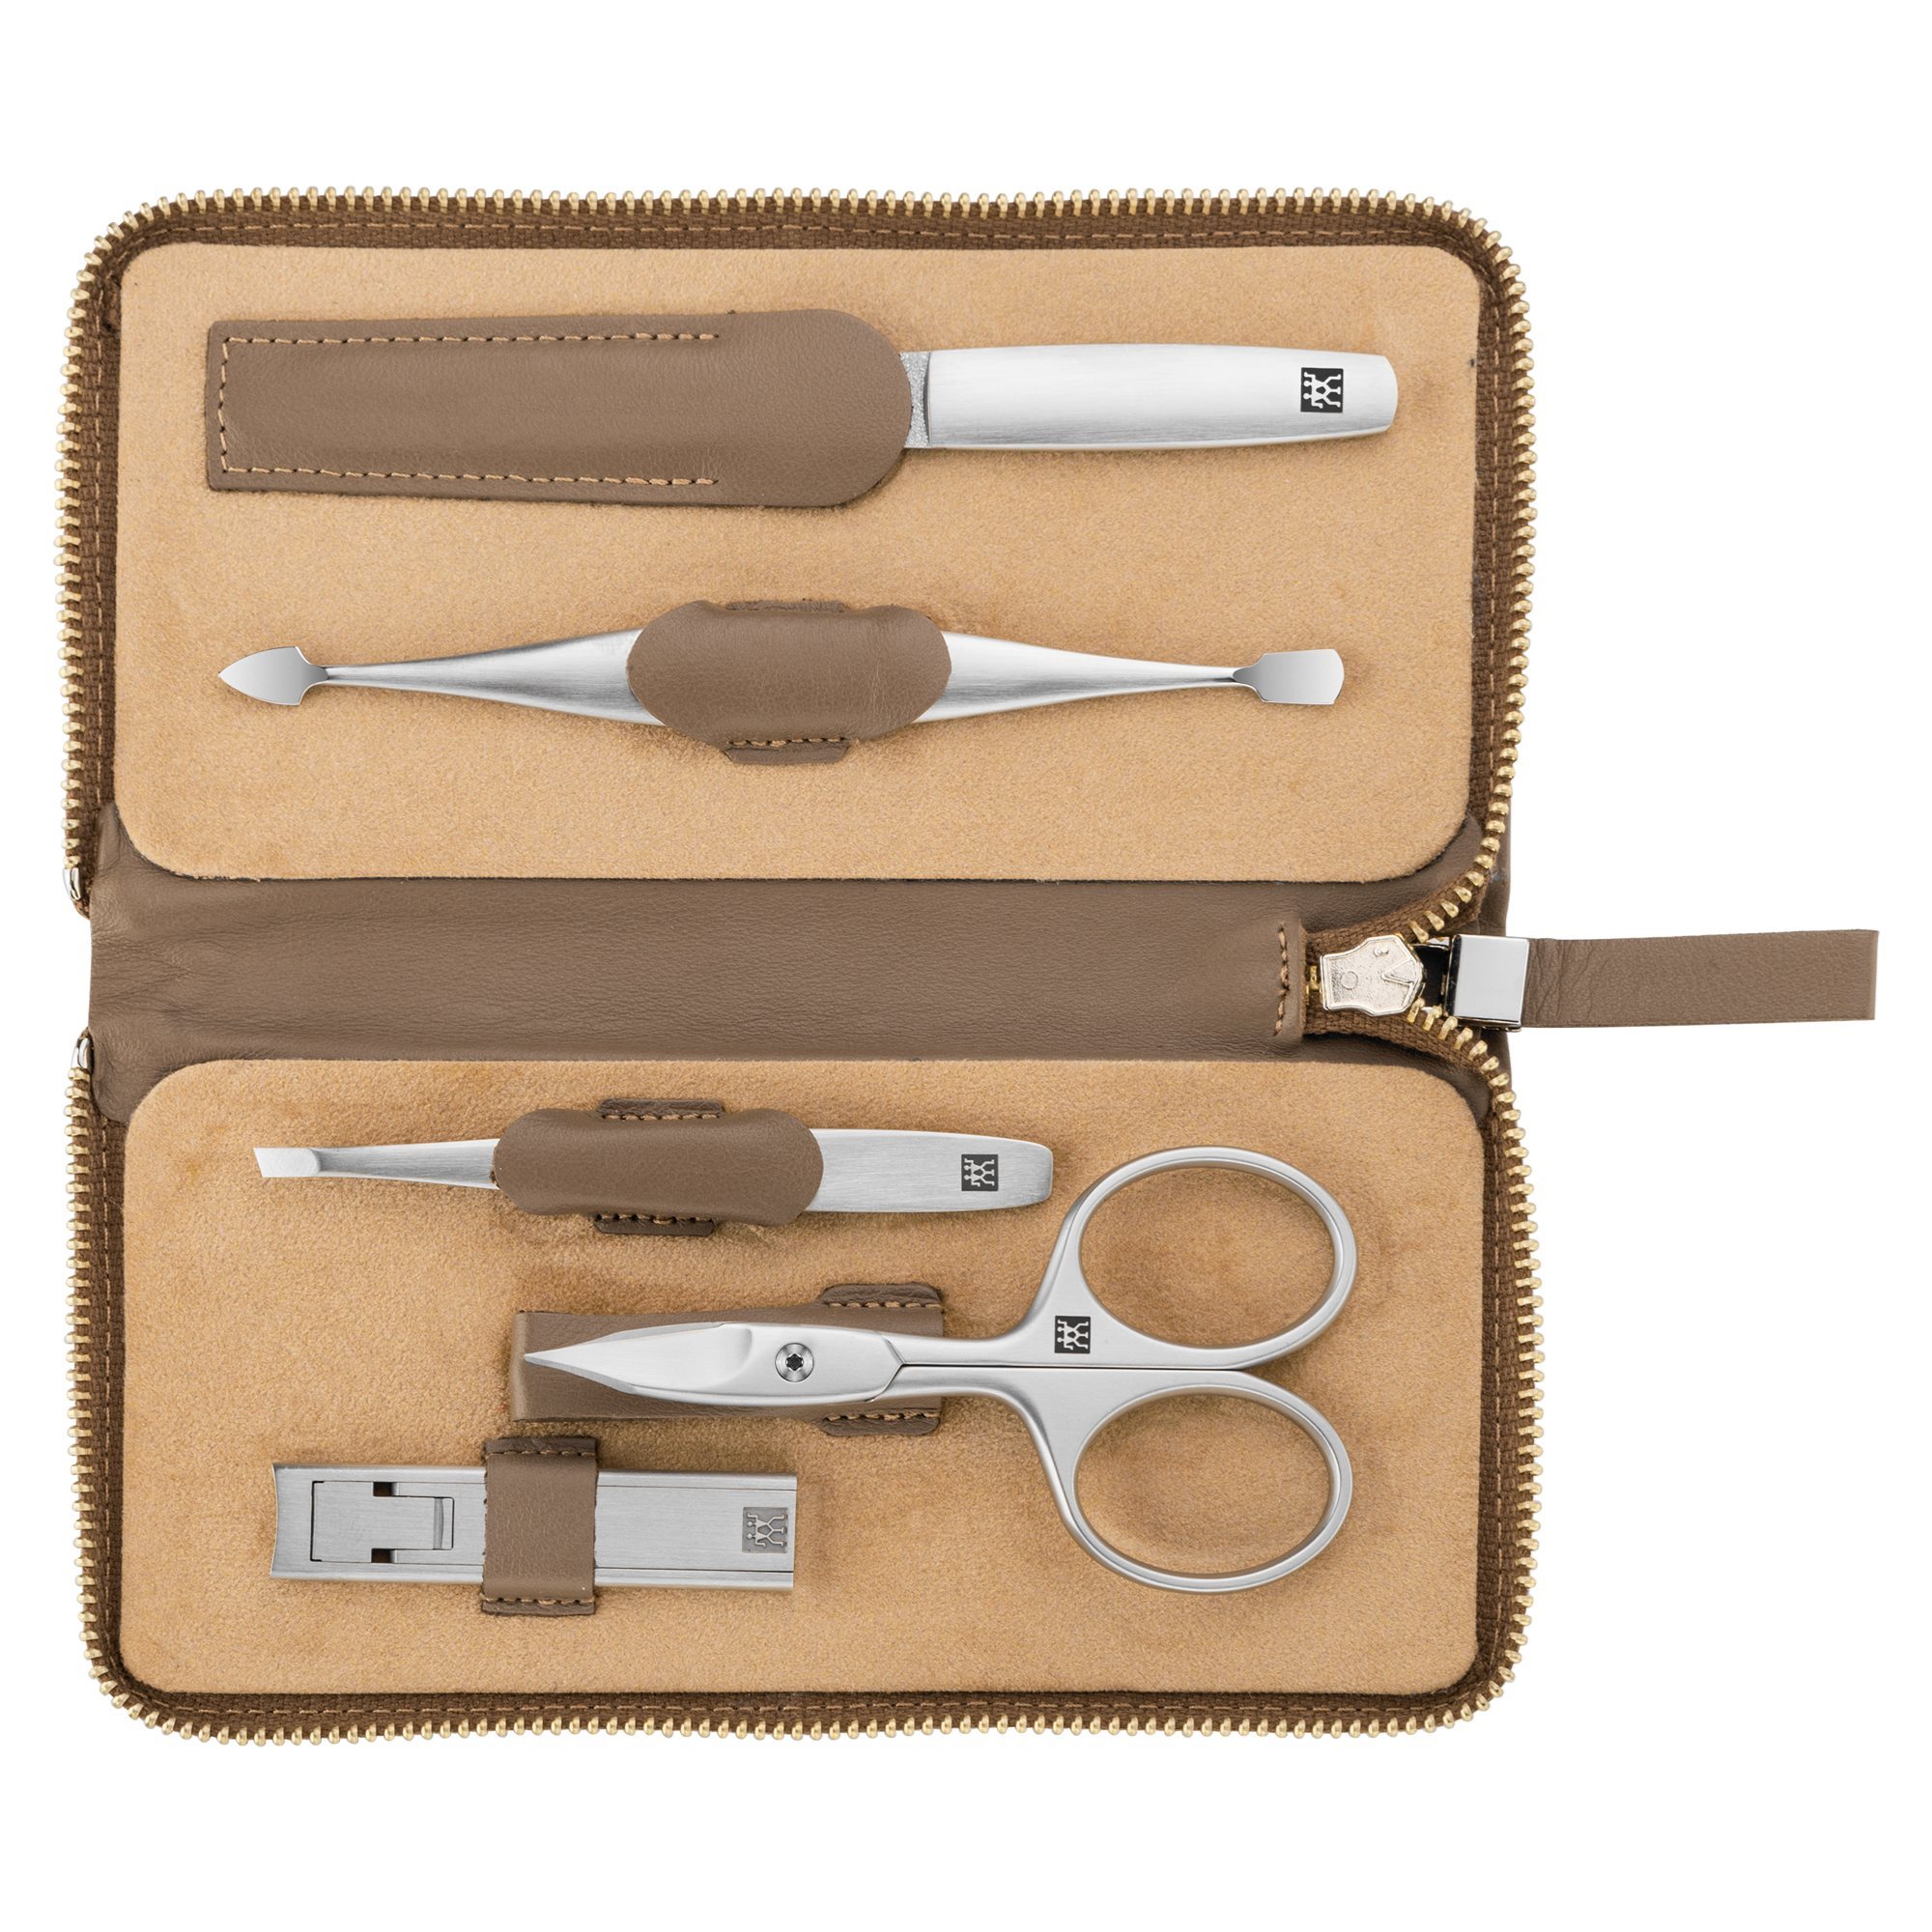 Zwilling KitchenShop manicure Twinox brown 5-piece set, - steel, leather case | nickel-plated